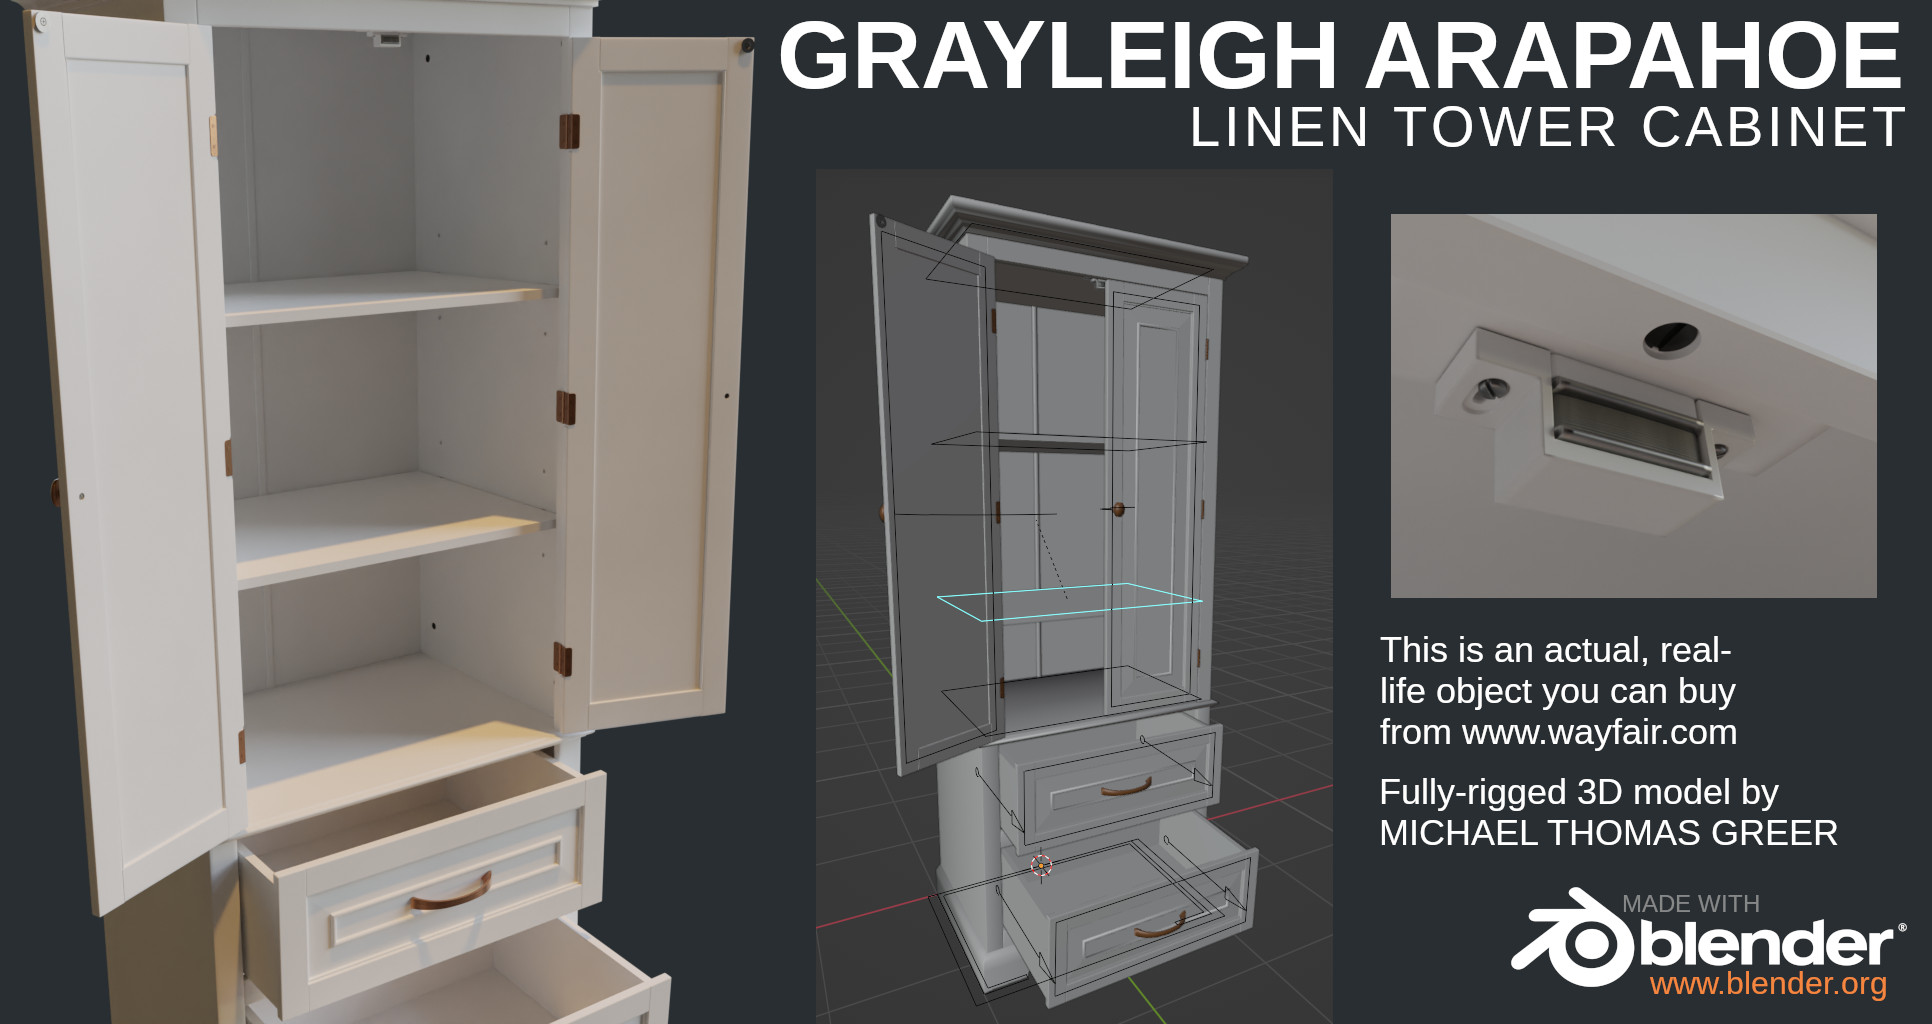 Grayleigh Arapahoe Tower Cabinet with Two Drawers preview image 3